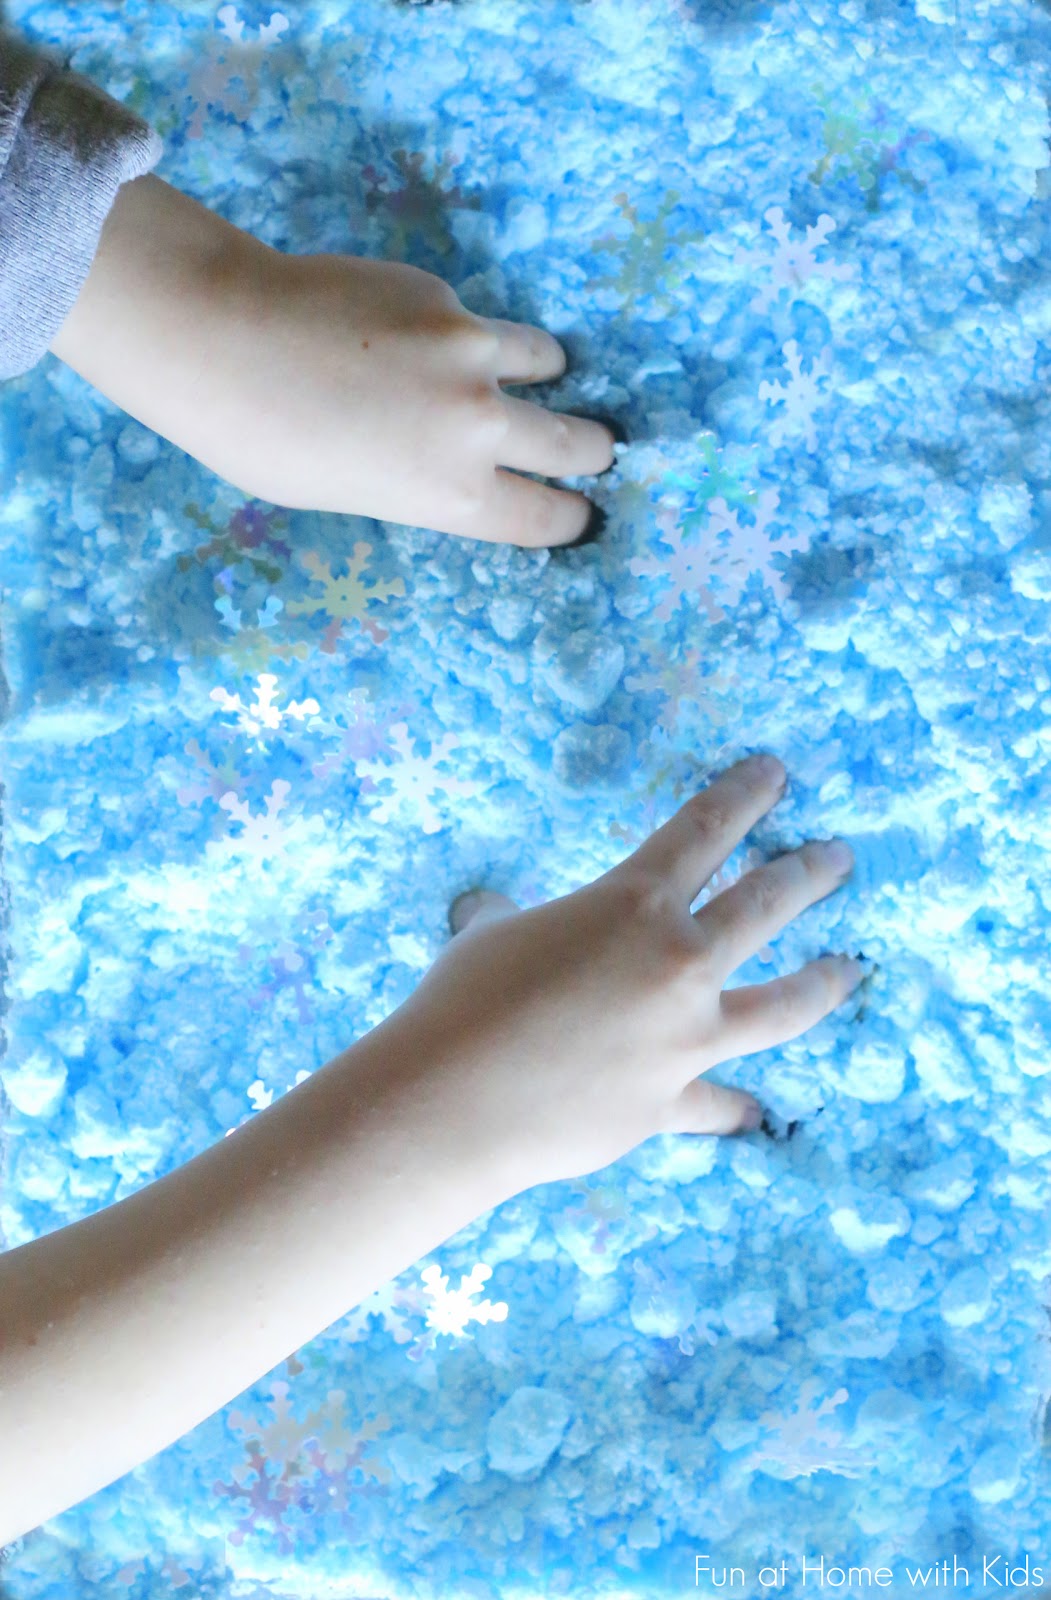 A new sensory play recipe for Magic Puffing Snow - it slowly puffs up and will even re-puff after it's been compressed.  From Fun at Home with Kids